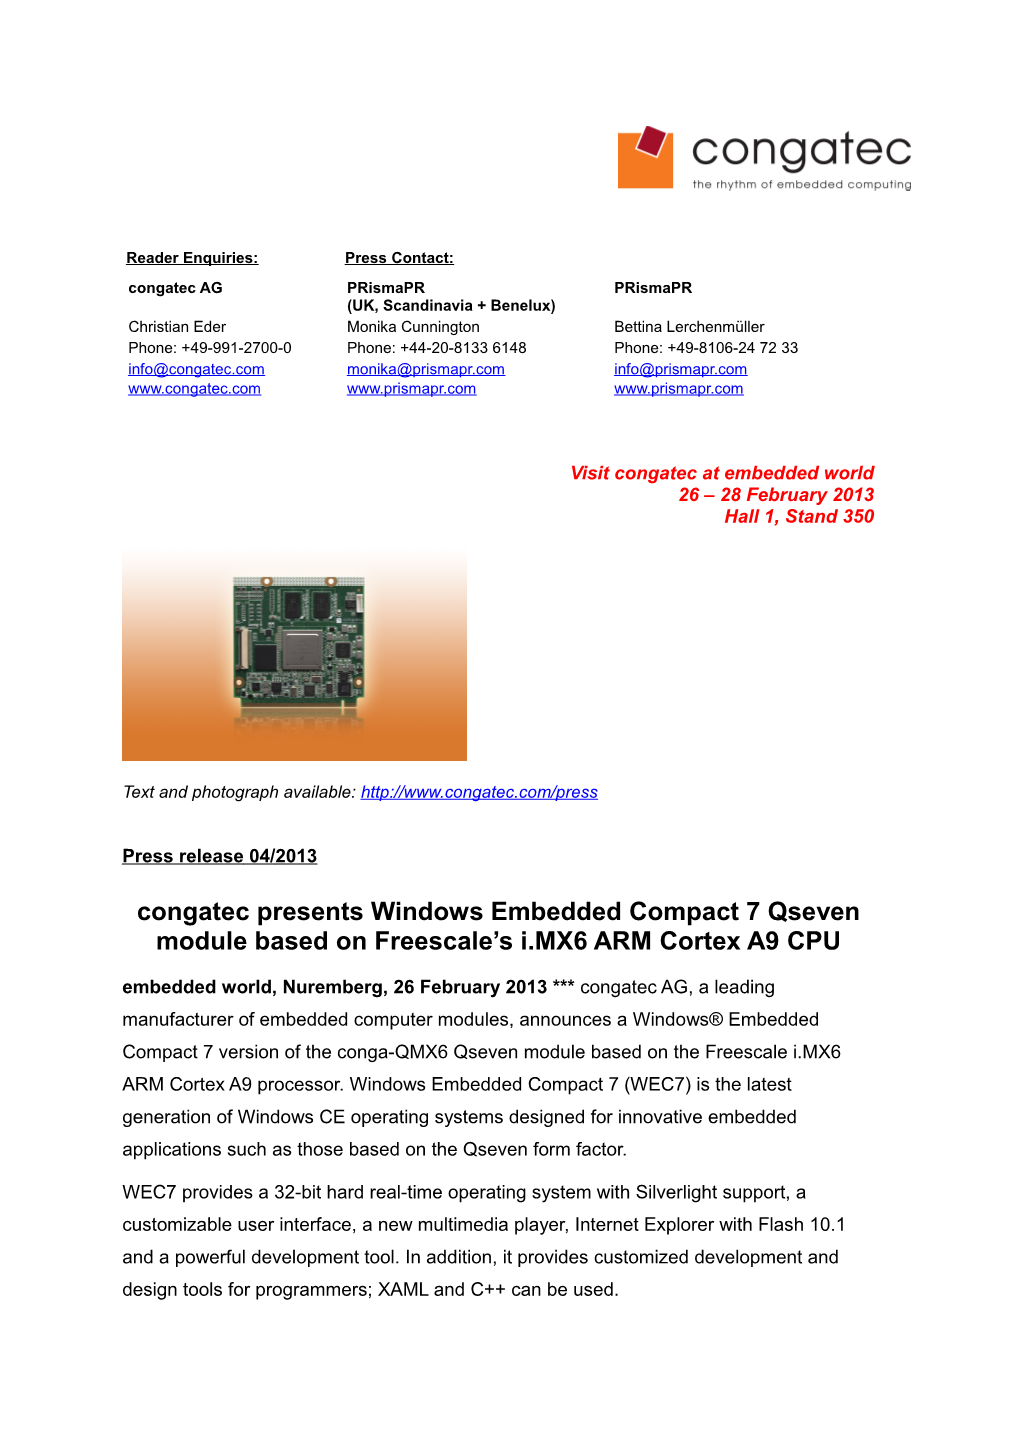 Congatec Presents Windows Embedded Compact 7 Qseven Module Based On Freescale’S I.MX6 ARM Cortex A9 CPU